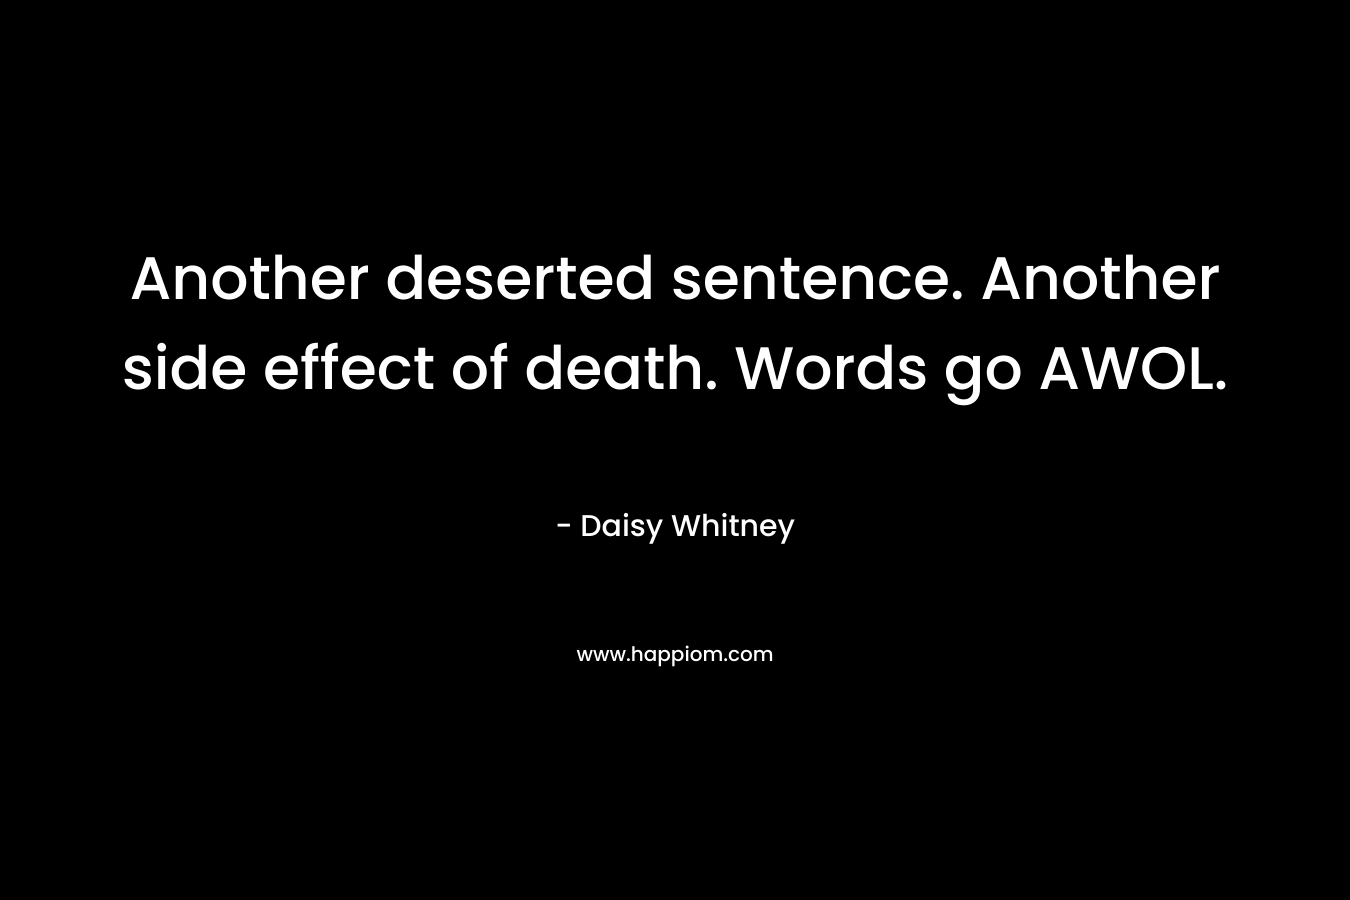 Another deserted sentence. Another side effect of death. Words go AWOL. – Daisy Whitney